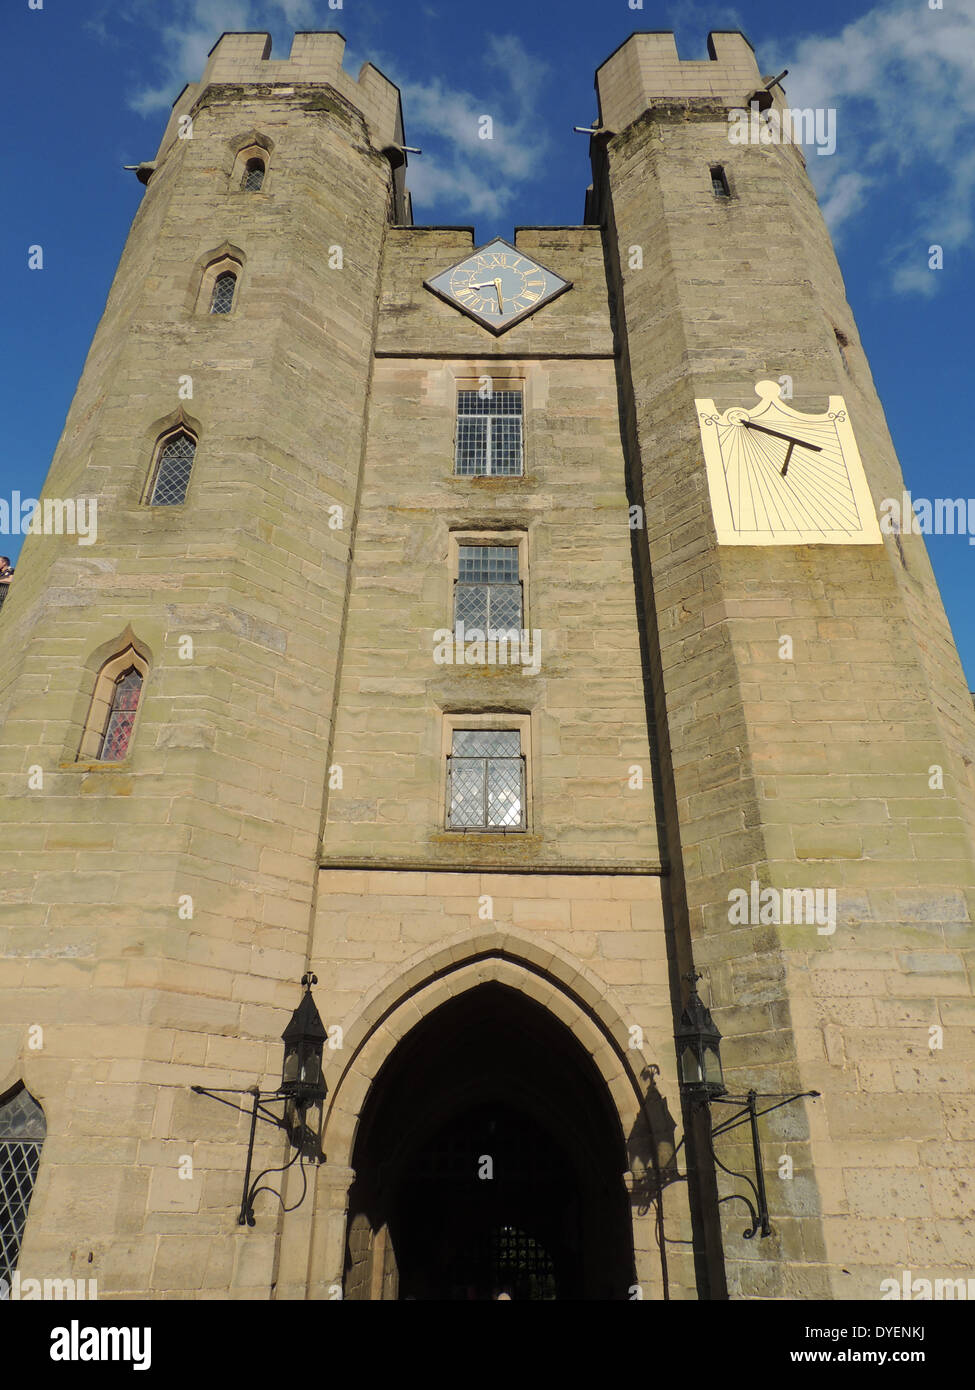 Sundial mounted on the entrance tower to at Warwick Castle dates to the 1700s. Stock Photo